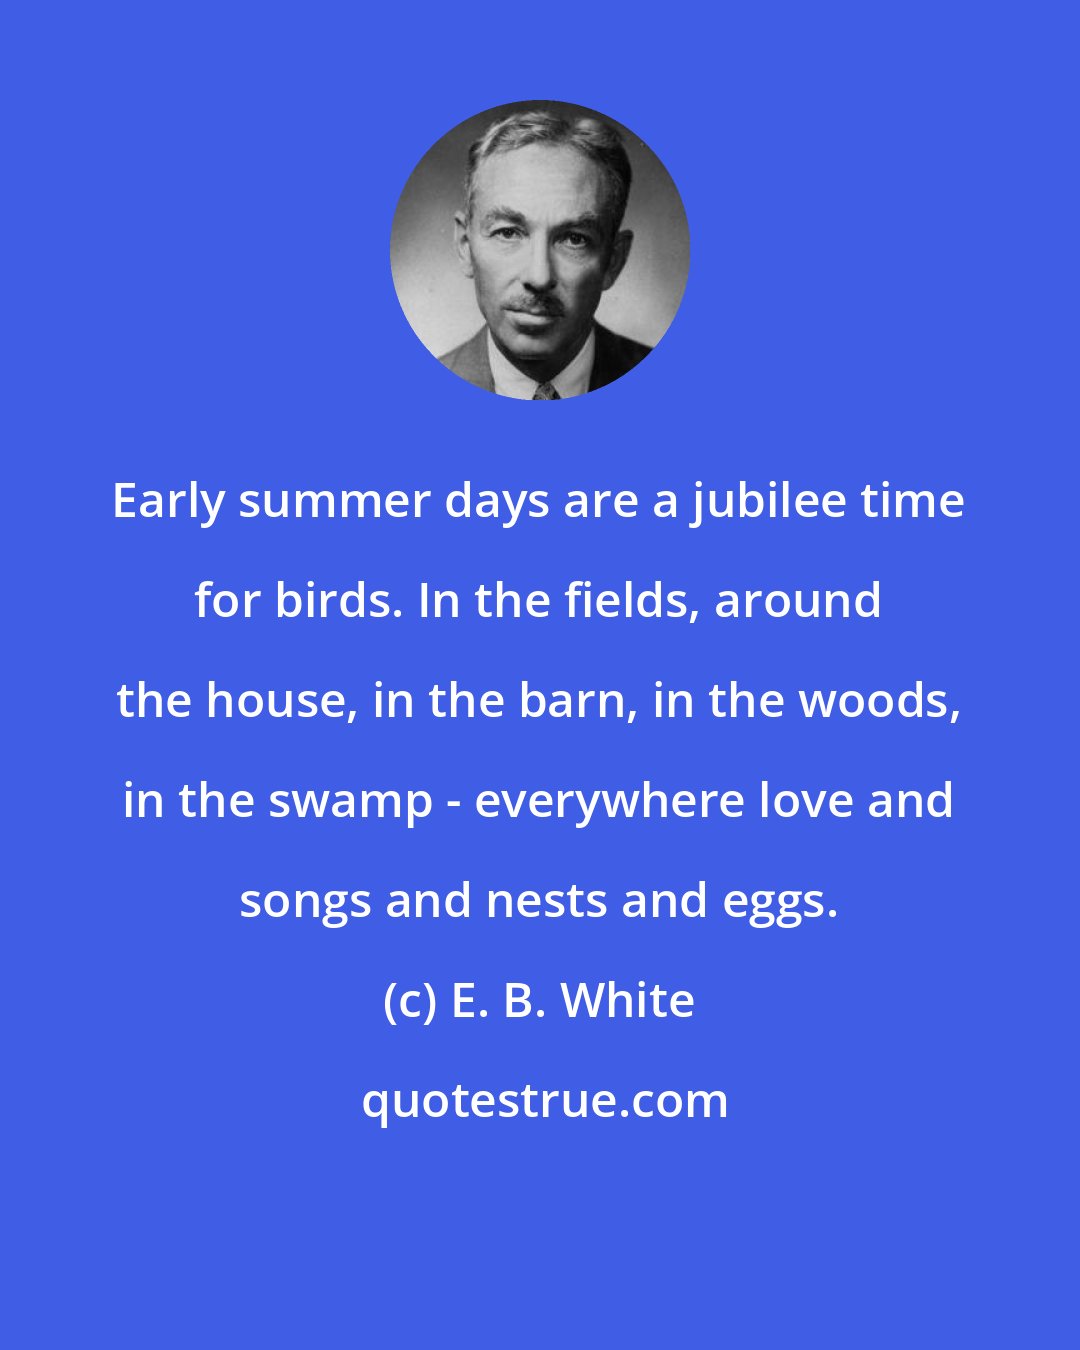 E. B. White: Early summer days are a jubilee time for birds. In the fields, around the house, in the barn, in the woods, in the swamp - everywhere love and songs and nests and eggs.